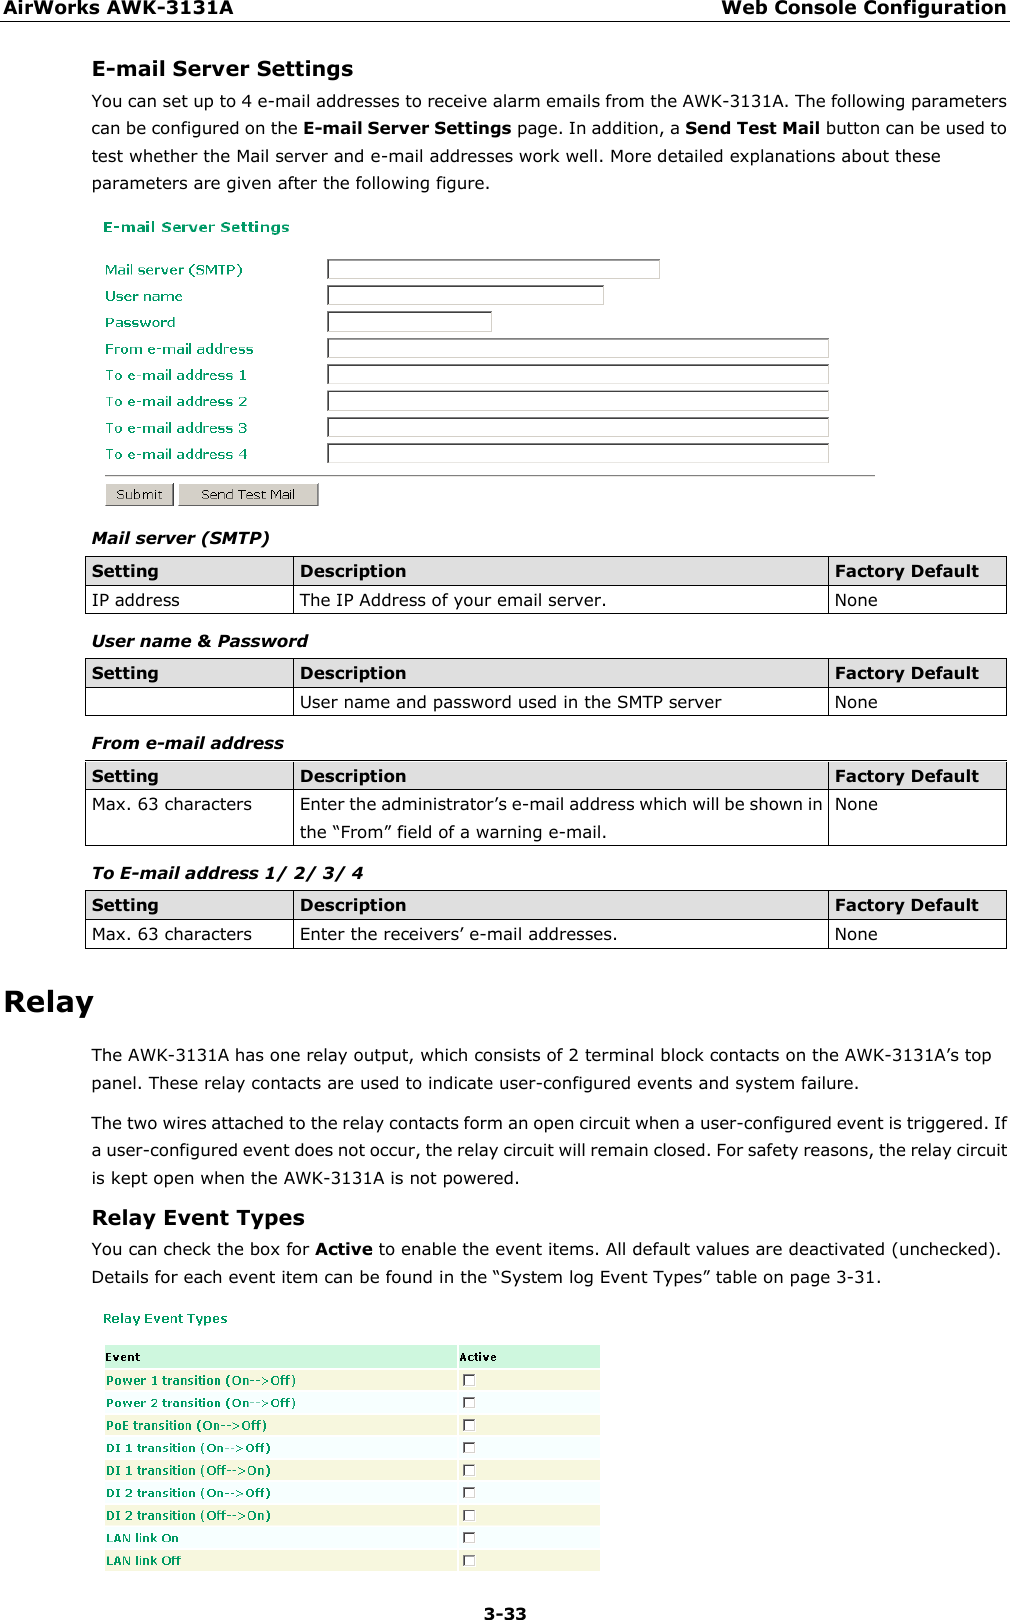 AirWorks AWK-3131A Web Console Configuration  3-33 E-mail Server Settings You can set up to 4 e-mail addresses to receive alarm emails from the AWK-3131A. The following parameters can be configured on the E-mail Server Settings page. In addition, a Send Test Mail button can be used to test whether the Mail server and e-mail addresses work well. More detailed explanations about these parameters are given after the following figure.  Mail server (SMTP) Setting Description Factory Default IP address The IP Address of your email server. None User name &amp; Password Setting Description Factory Default   User name and password used in the SMTP server None From e-mail address Setting Description Factory Default Max. 63 characters Enter the administrator’s e-mail address which will be shown in the “From” field of a warning e-mail. None To E-mail address 1/ 2/ 3/ 4 Setting Description Factory Default Max. 63 characters Enter the receivers’ e-mail addresses. None Relay The AWK-3131A has one relay output, which consists of 2 terminal block contacts on the AWK-3131A’s top panel. These relay contacts are used to indicate user-configured events and system failure.   The two wires attached to the relay contacts form an open circuit when a user-configured event is triggered. If a user-configured event does not occur, the relay circuit will remain closed. For safety reasons, the relay circuit is kept open when the AWK-3131A is not powered. Relay Event Types You can check the box for Active to enable the event items. All default values are deactivated (unchecked). Details for each event item can be found in the “System log Event Types” table on page 3-31.  